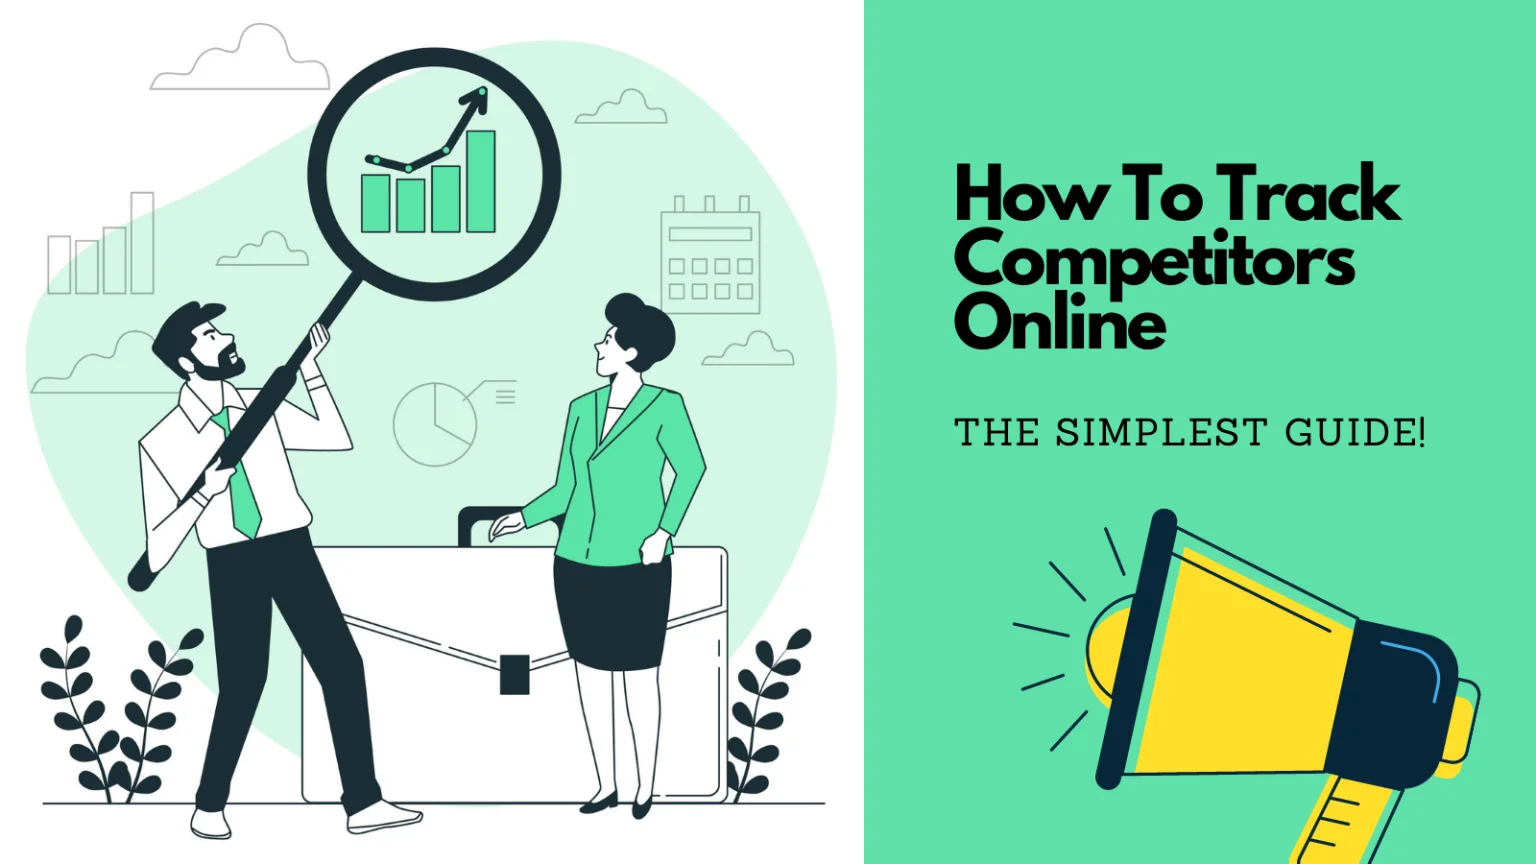 How-To-Track-Competitors-Online-The-Simplest-Guide